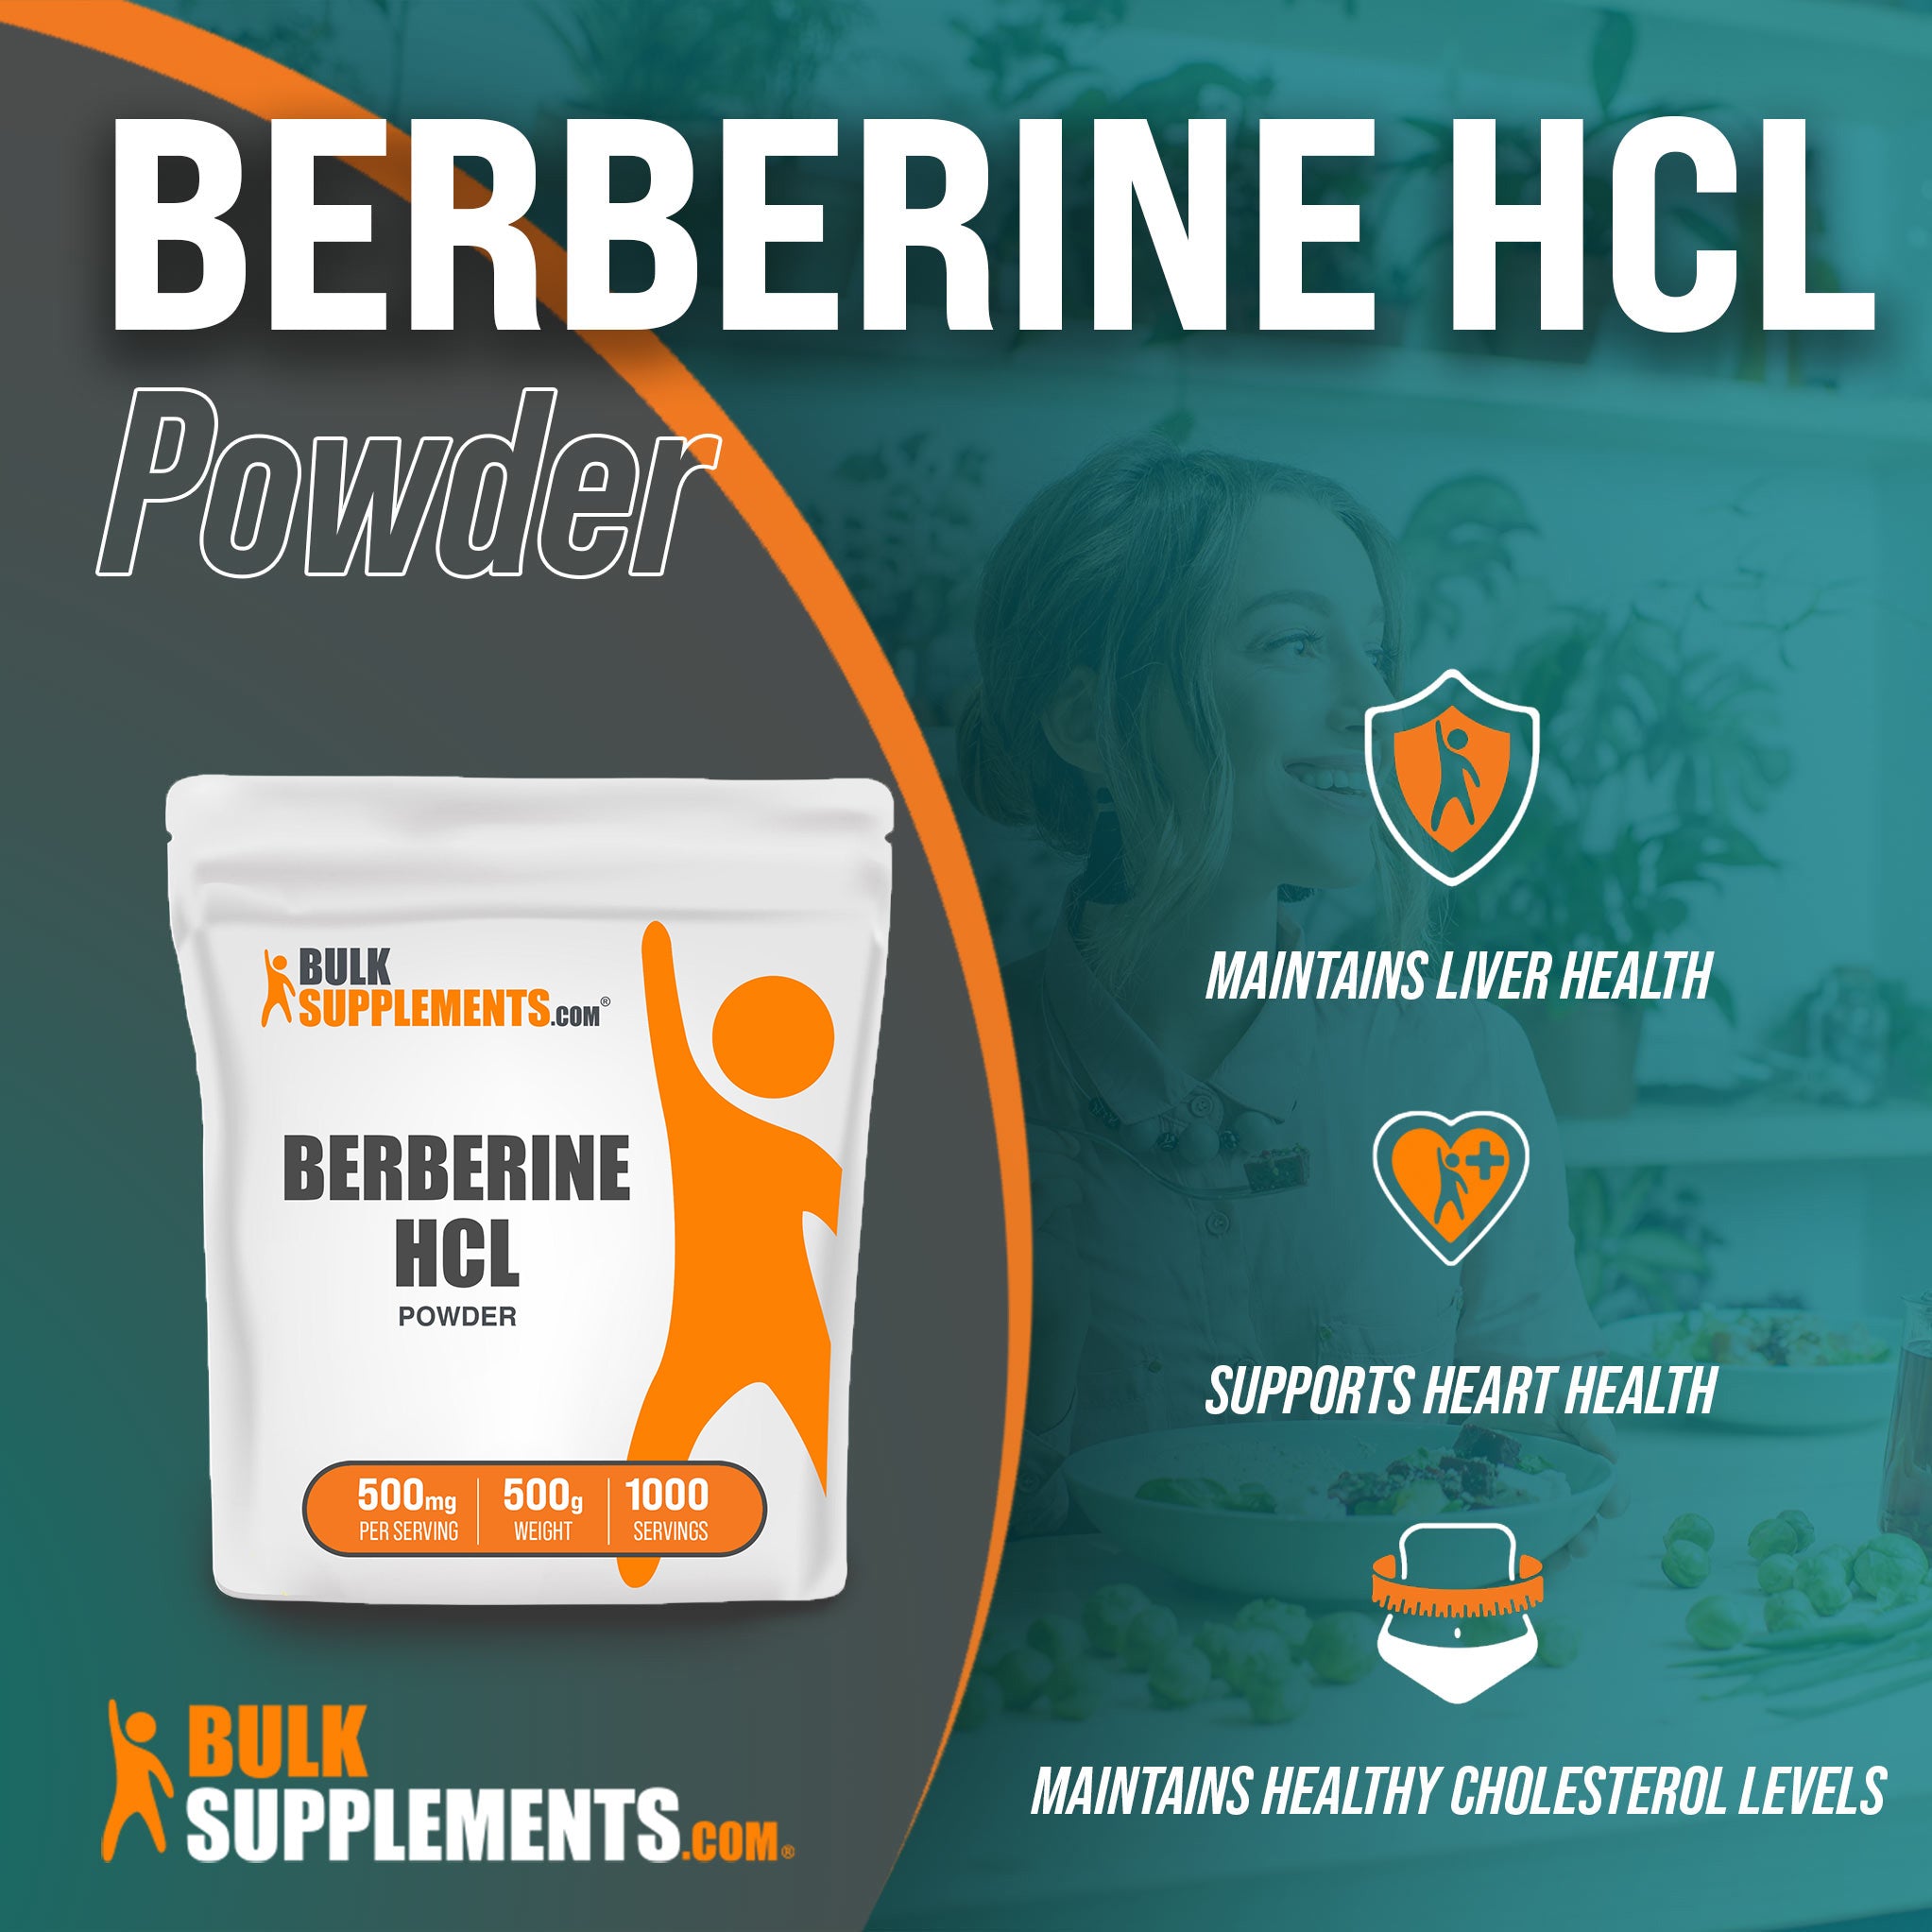 Berberine HCl from Bulk Supplements for heart and liver health 